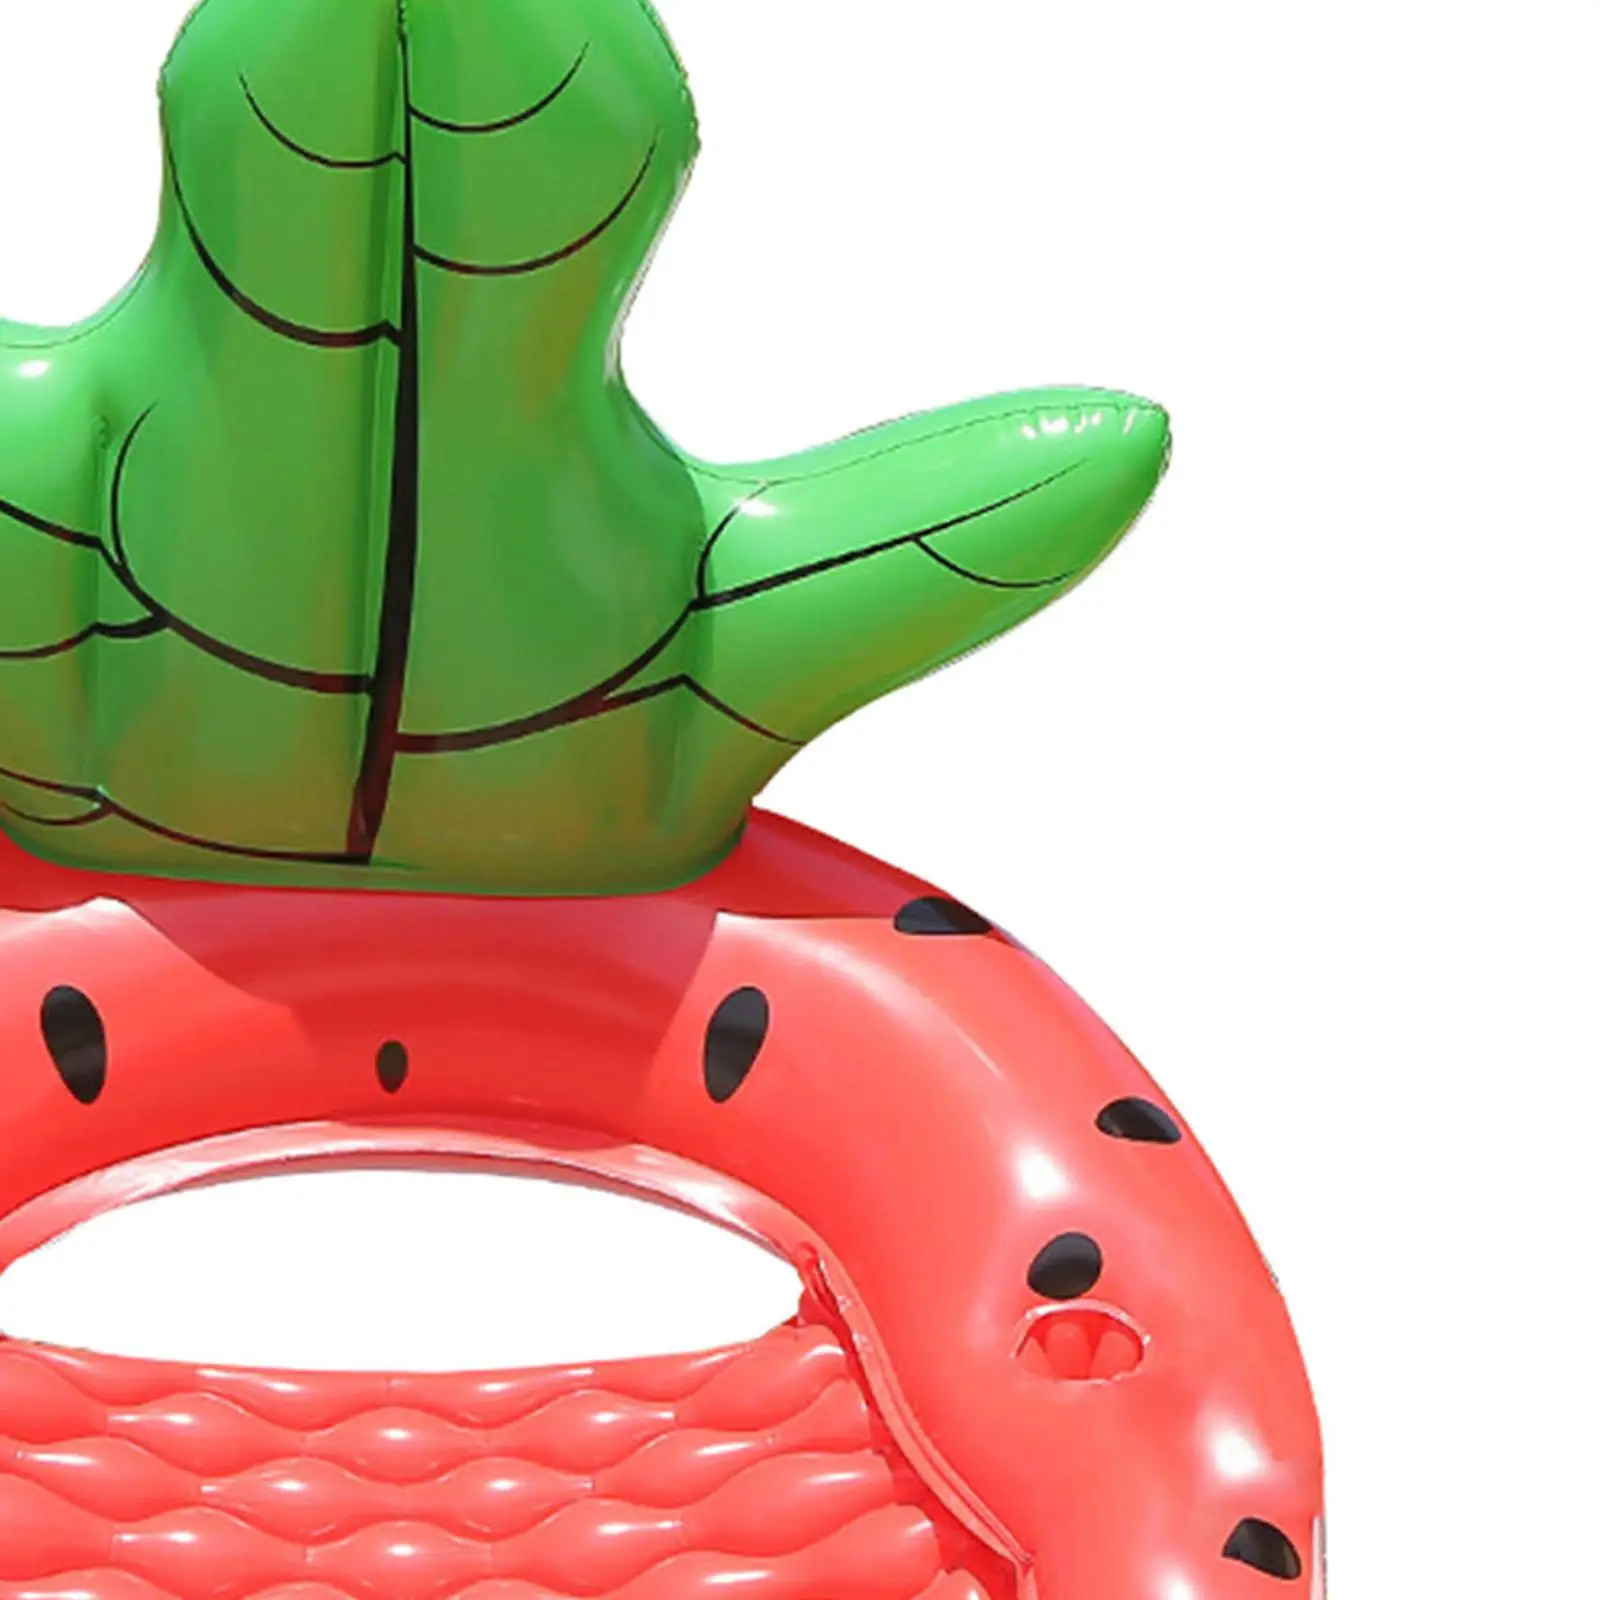 Watermelon Inflatable Pool Float Water Hammock Float Inflatable Pool Lounge Chair Float with Handles for Outdoor Pool Party